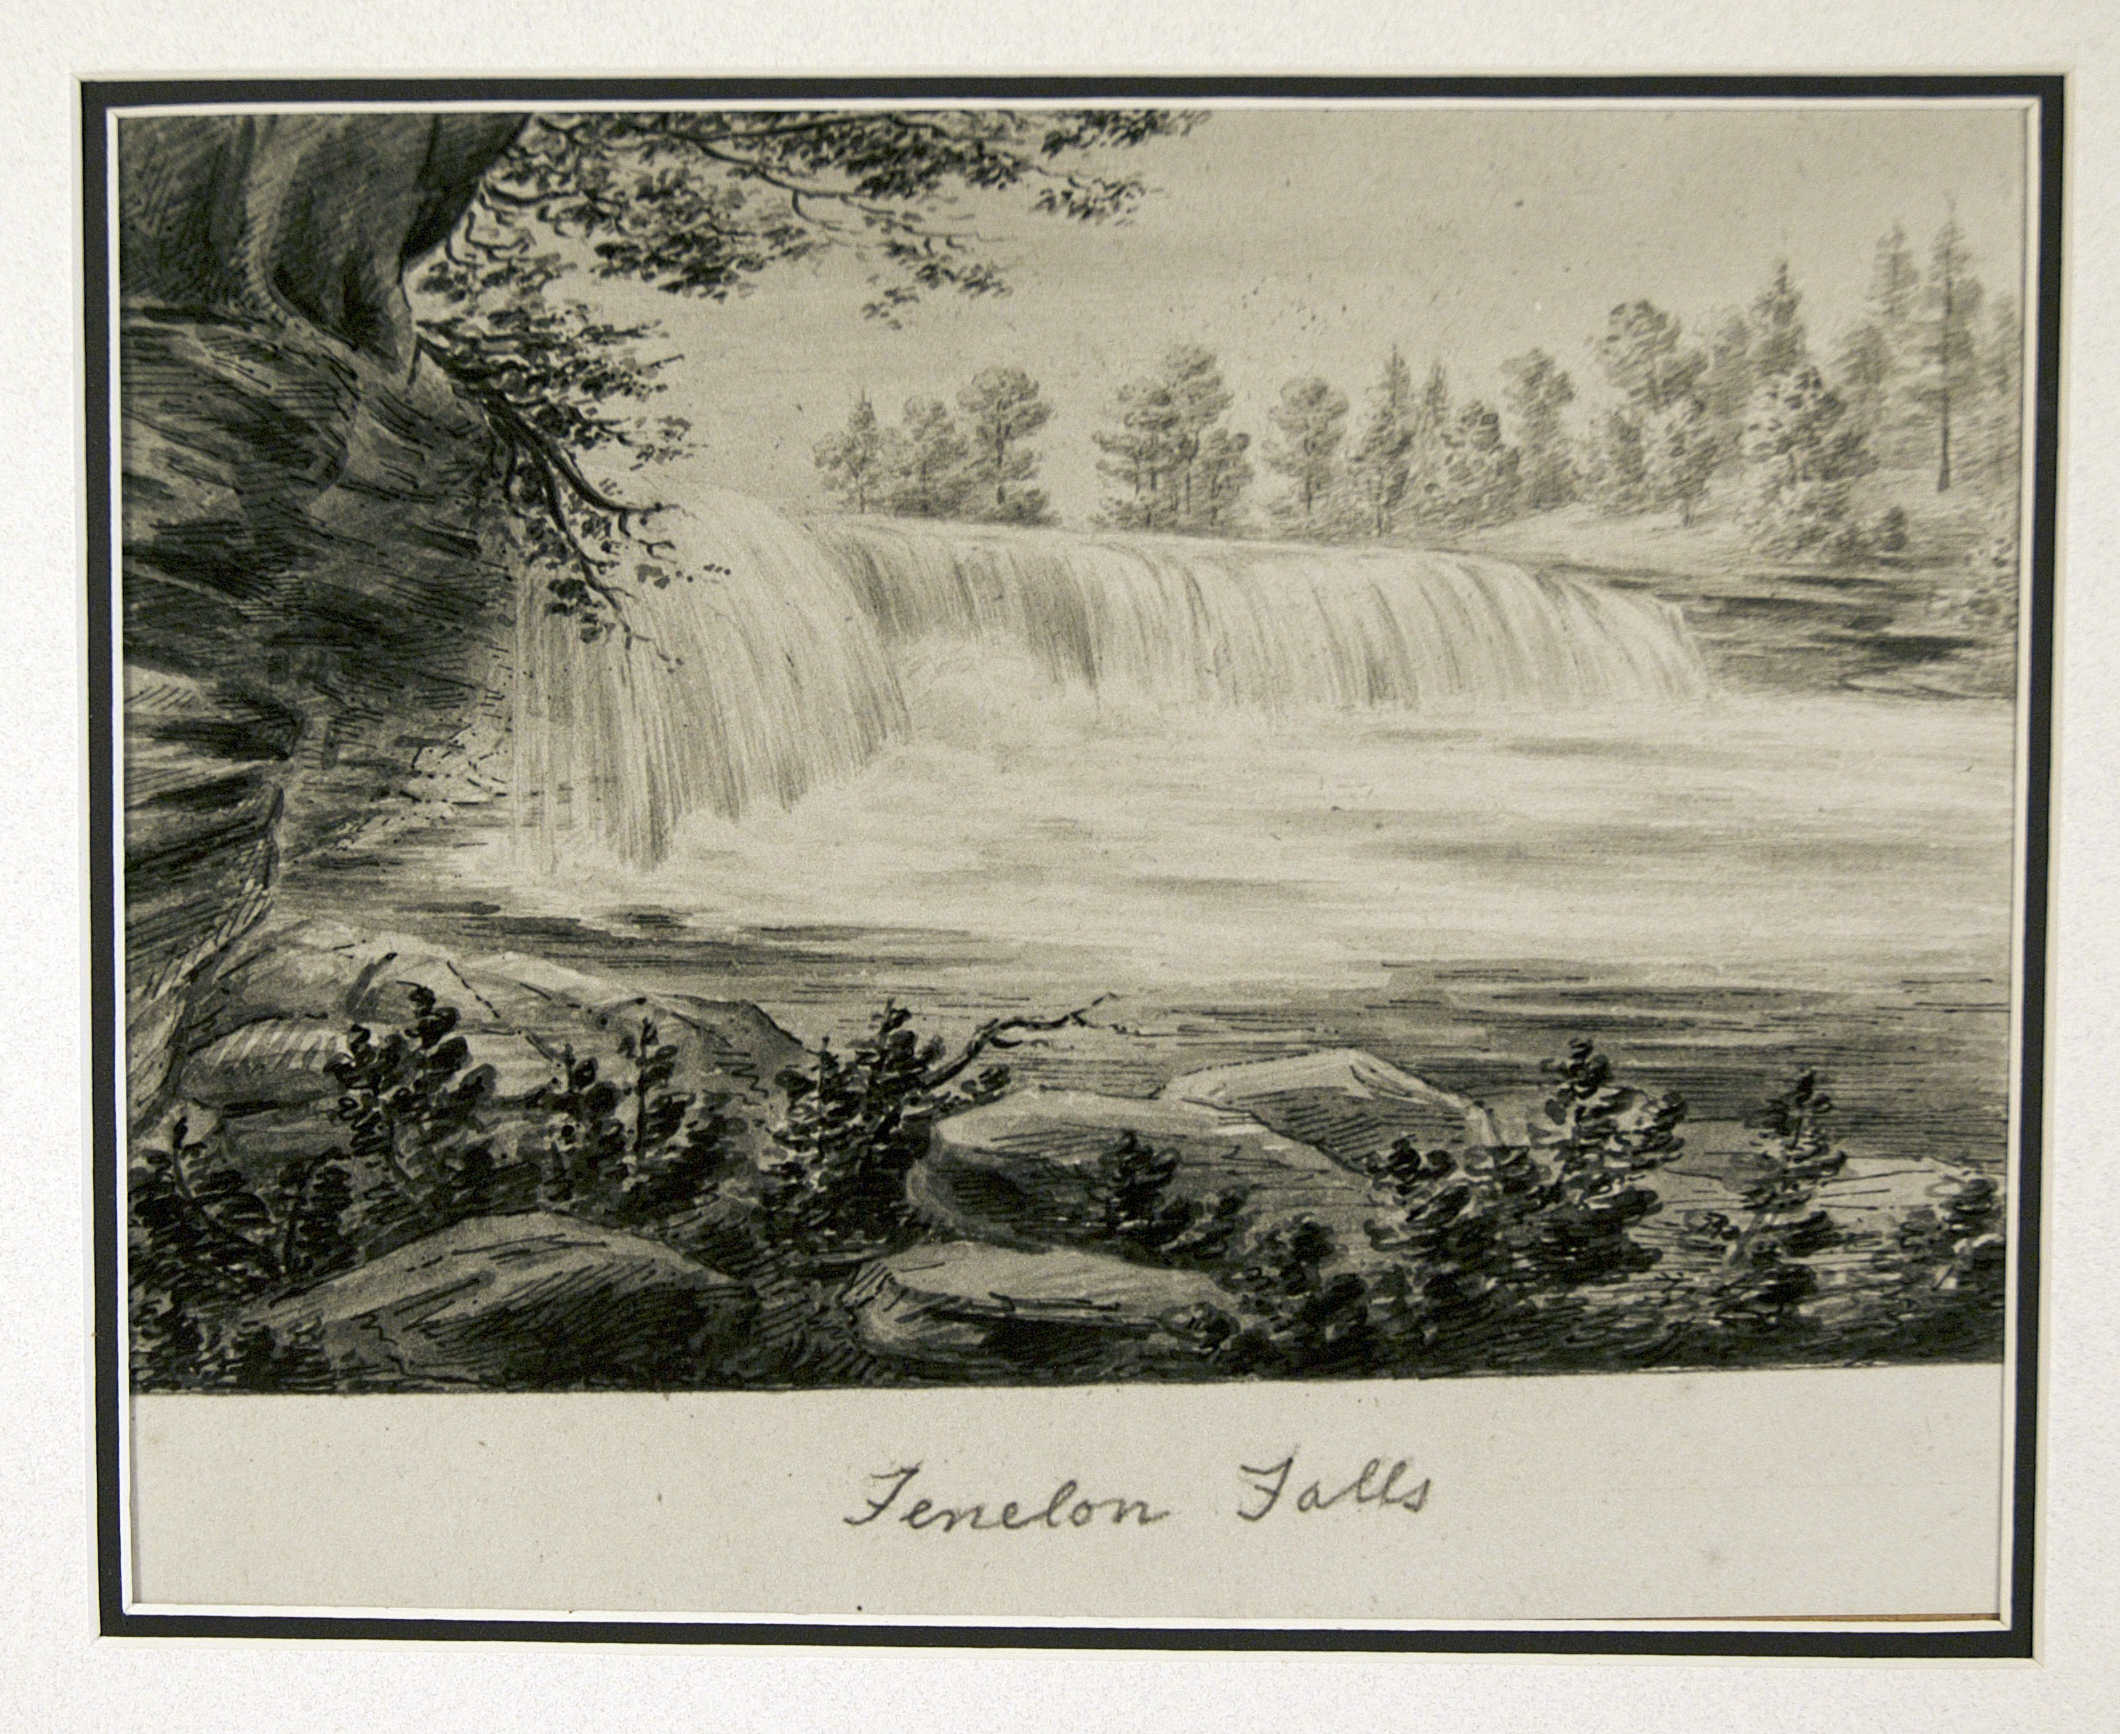 Charcoal sketch of Fenelon Falls Circa 1837. The sketch is done from a rocky shore just under a ledge on the south side of the falls. The small horseshoe falls are heavy with water. In the right of the sketch where the present town of Fenelon Falls is, there is a rocky shore leading to trees.